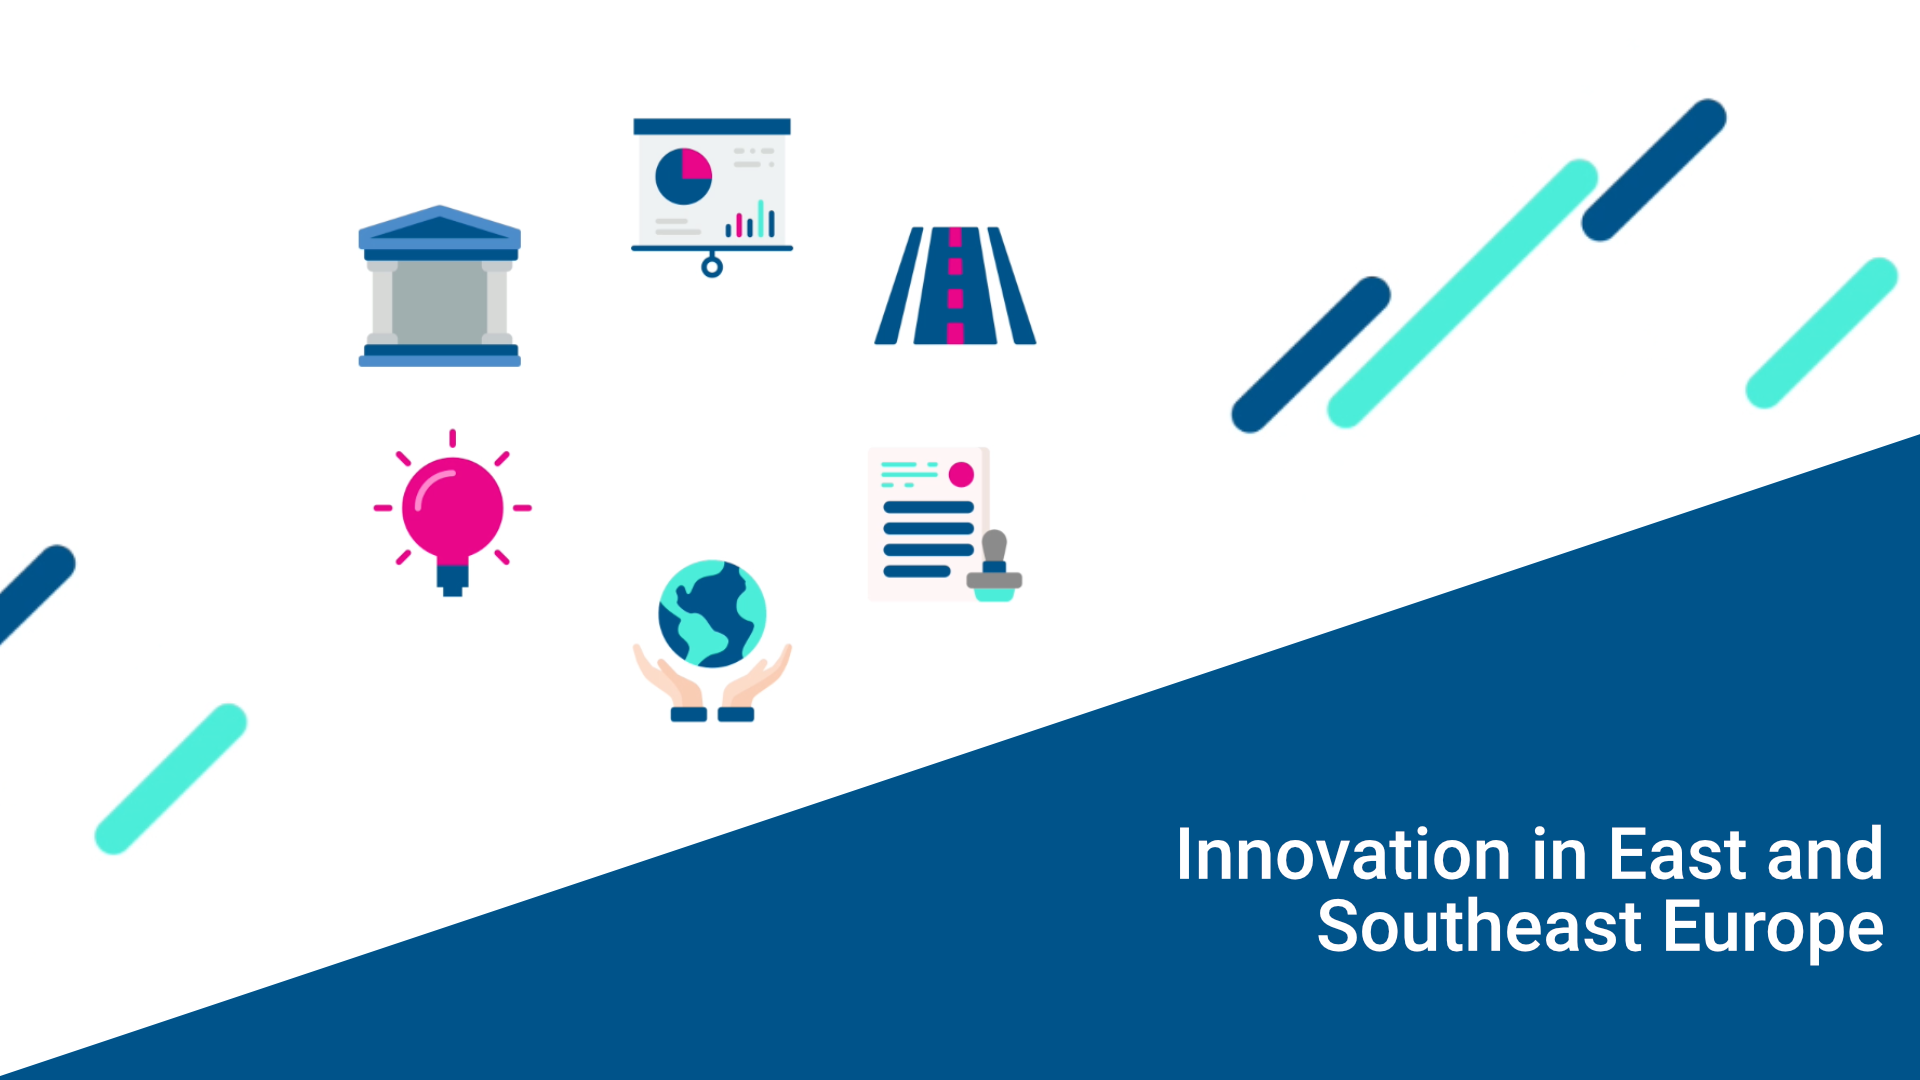 Innovation in East and Southeast Europe